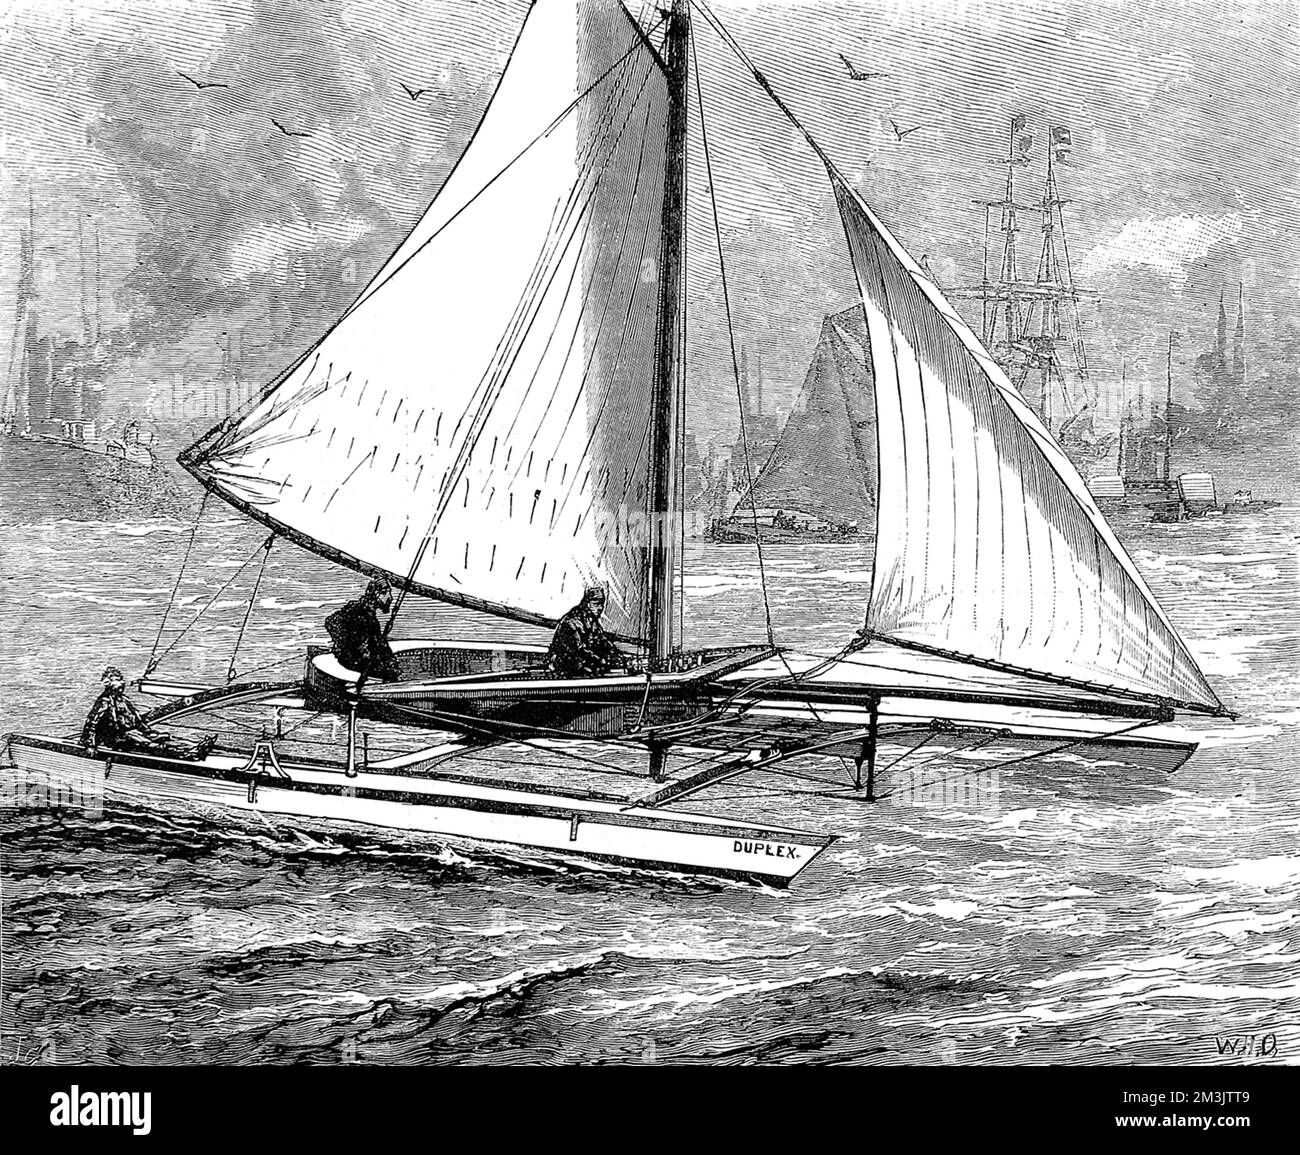 Engraving of a Duplex Catamaran, built in Rhode Island USA, for Mr. Henry N. Custance, honorary treasurer of the Corinthian Yacht Club, August 1880.  The engraving shows the vessel near her moorings on the River Thames at Erith.  The catamaran was 33 feet long, with a draught of 3 foot, and had been recorded making 23 mph (with the tide) in the Lower Hope.     Date: 1880 Stock Photo